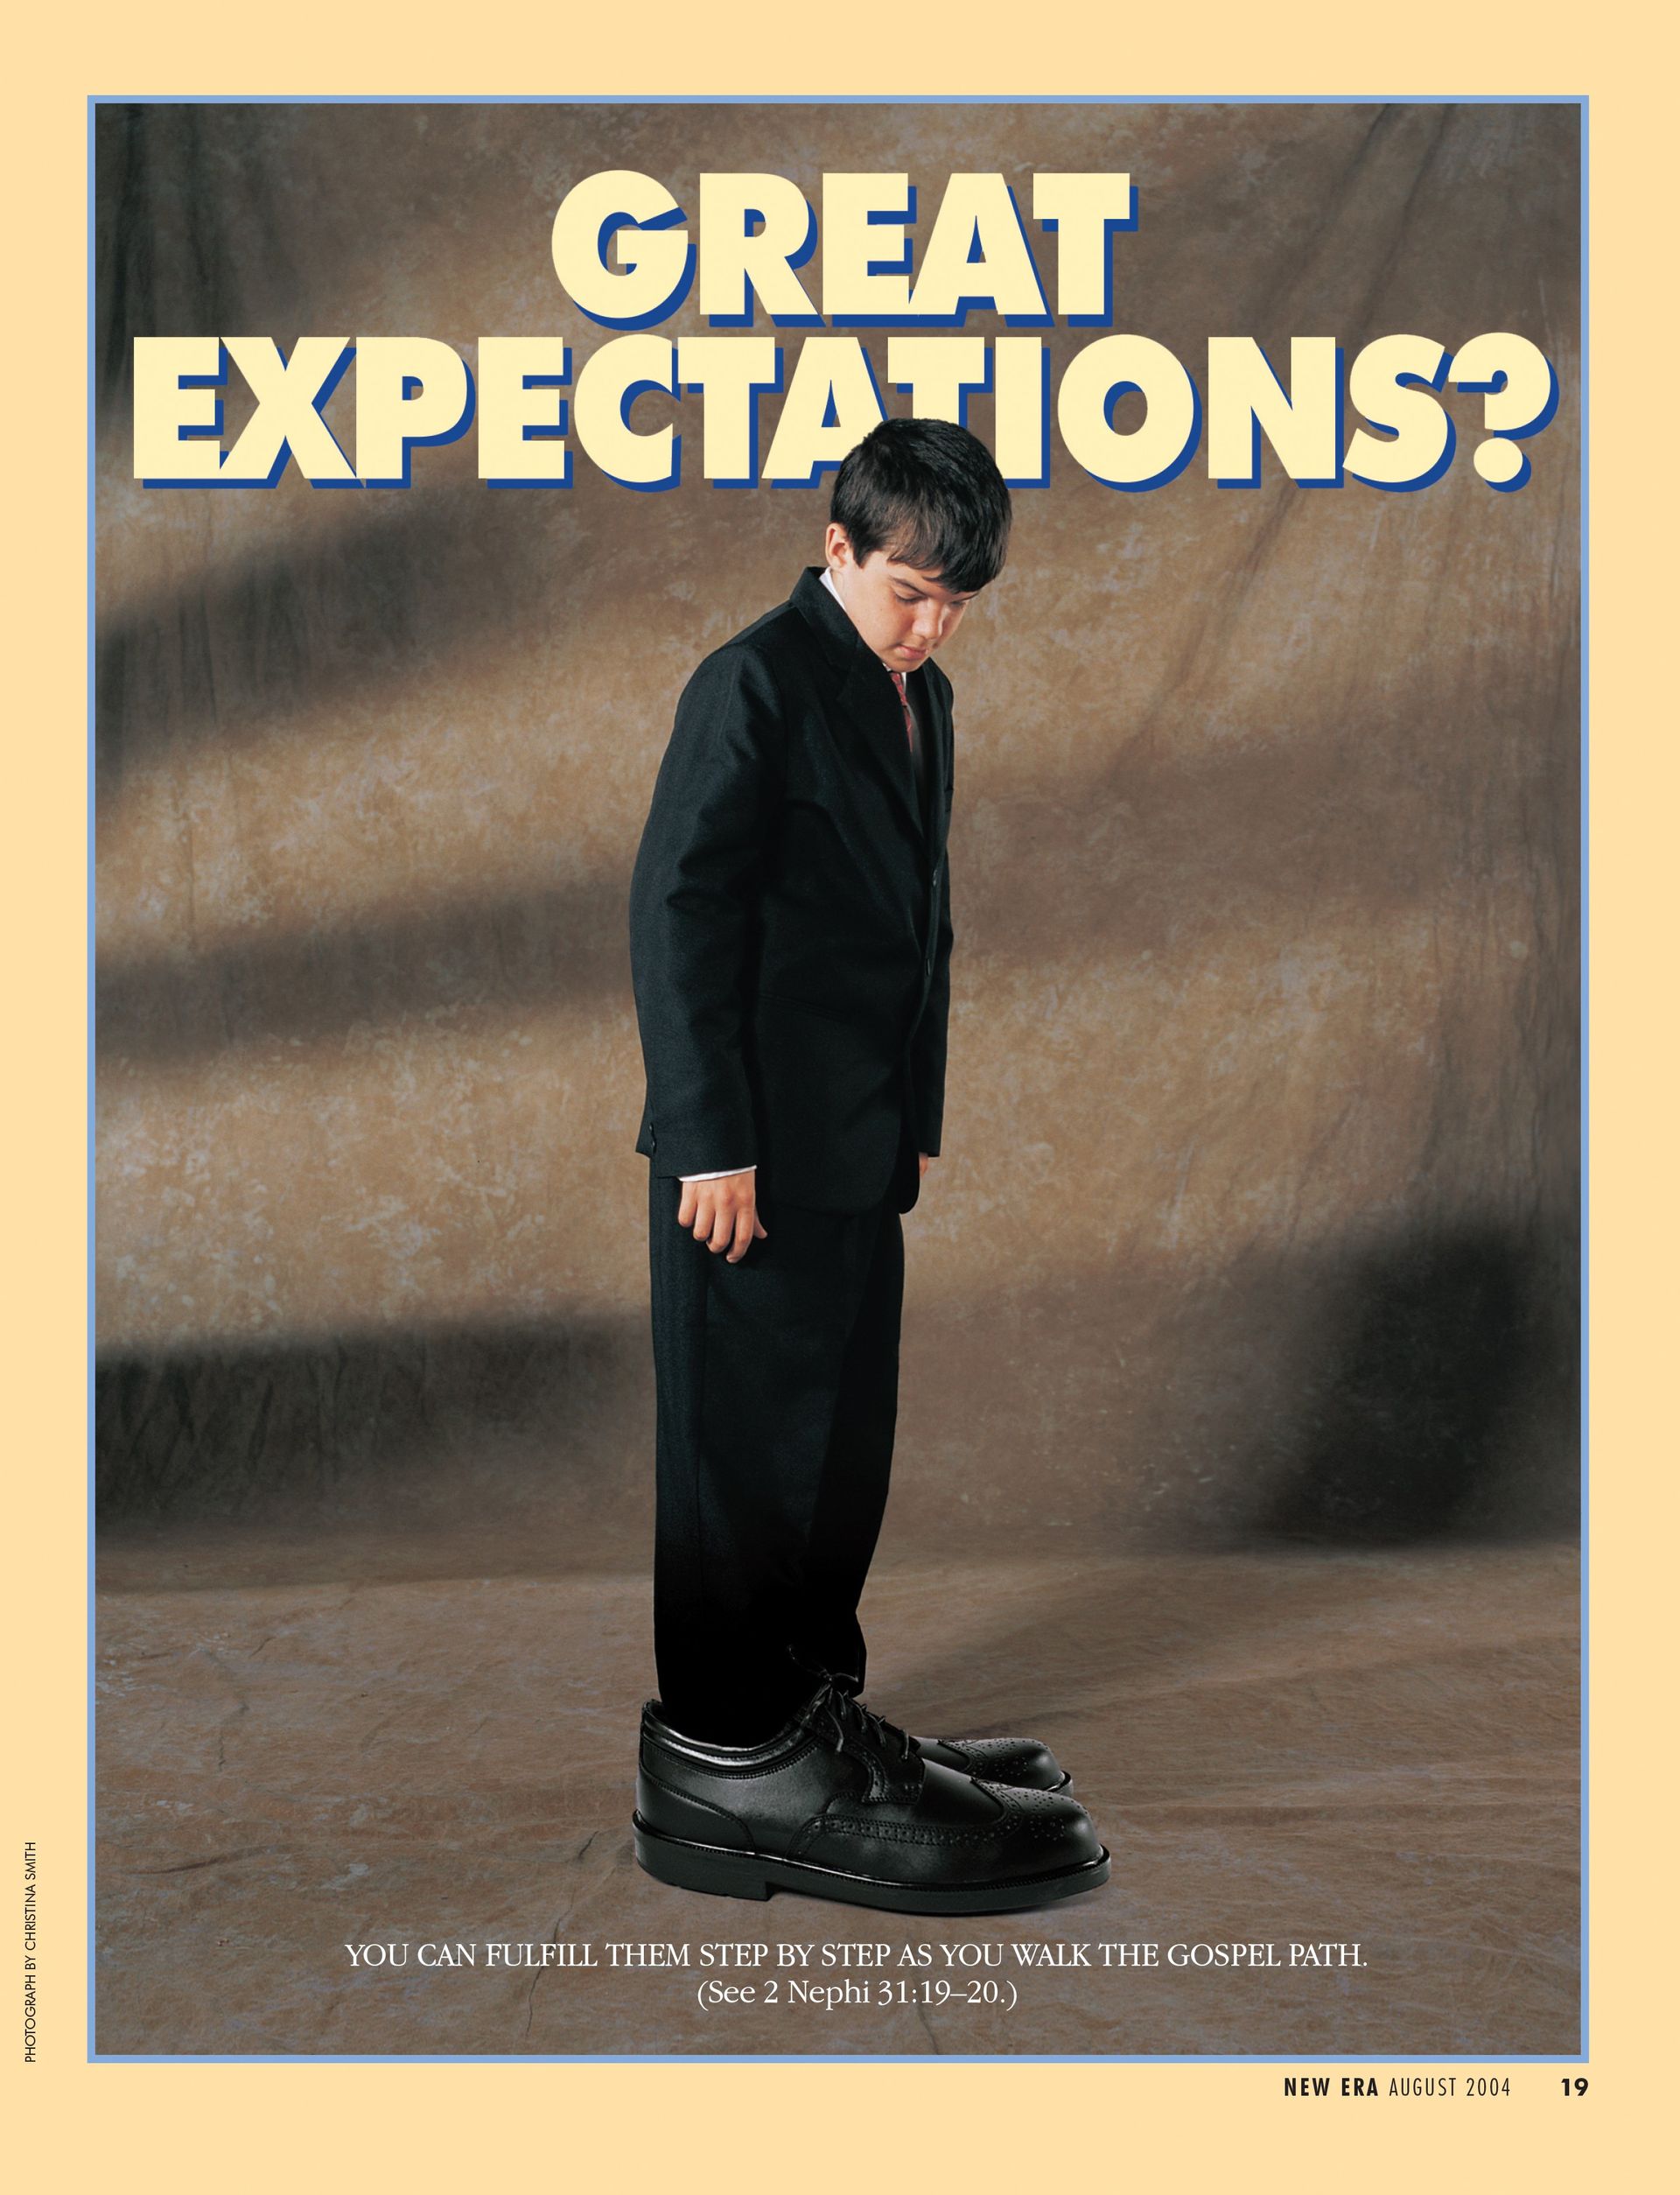 Great Expectations? You can fulfill them step by step as you walk the gospel path. (See 2 Nephi 31:19–20.) Aug. 2004 © undefined ipCode 1.